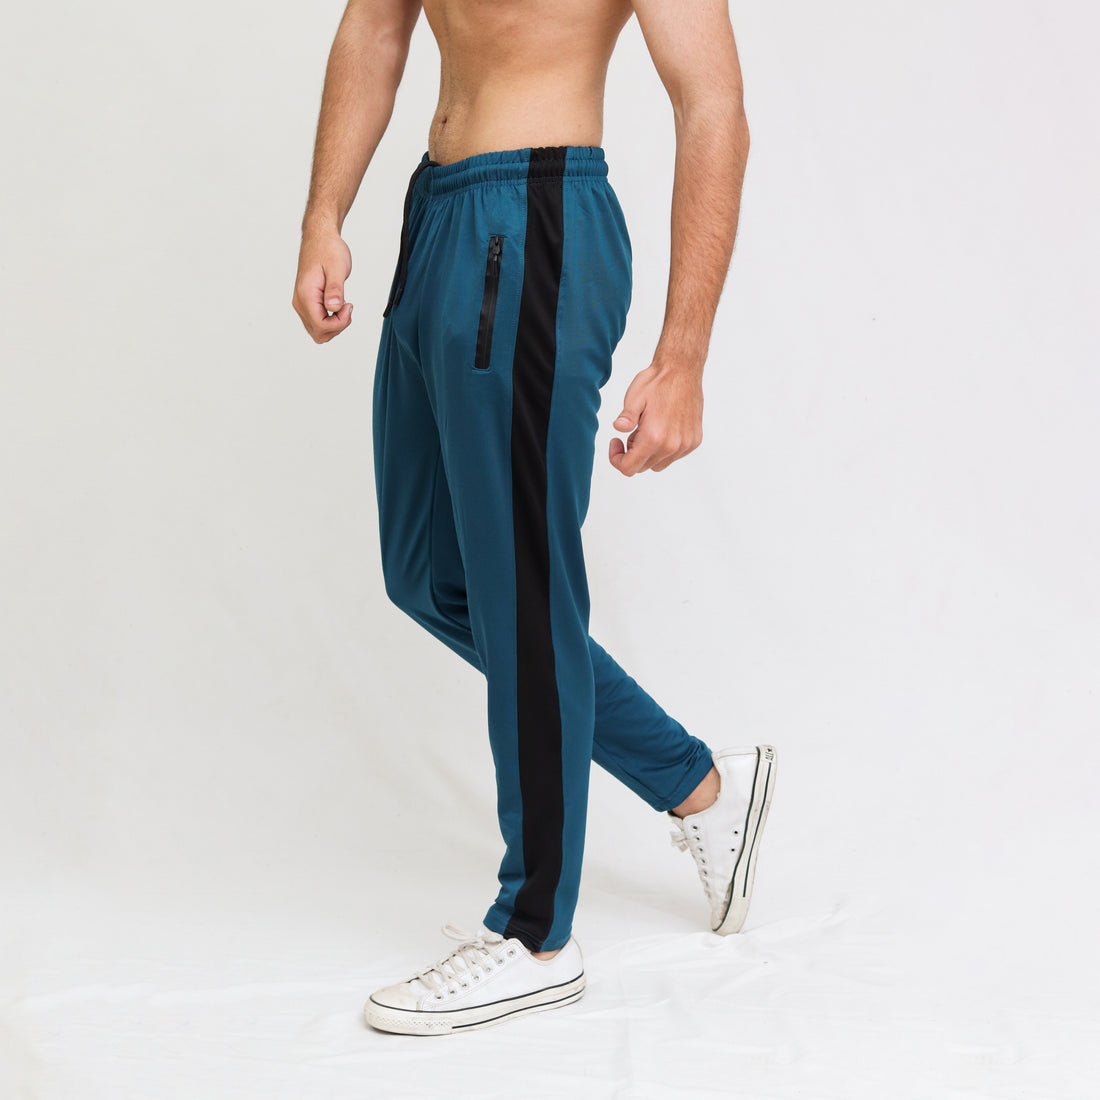 Teal Lycra Quick Dry With Black Side Panel